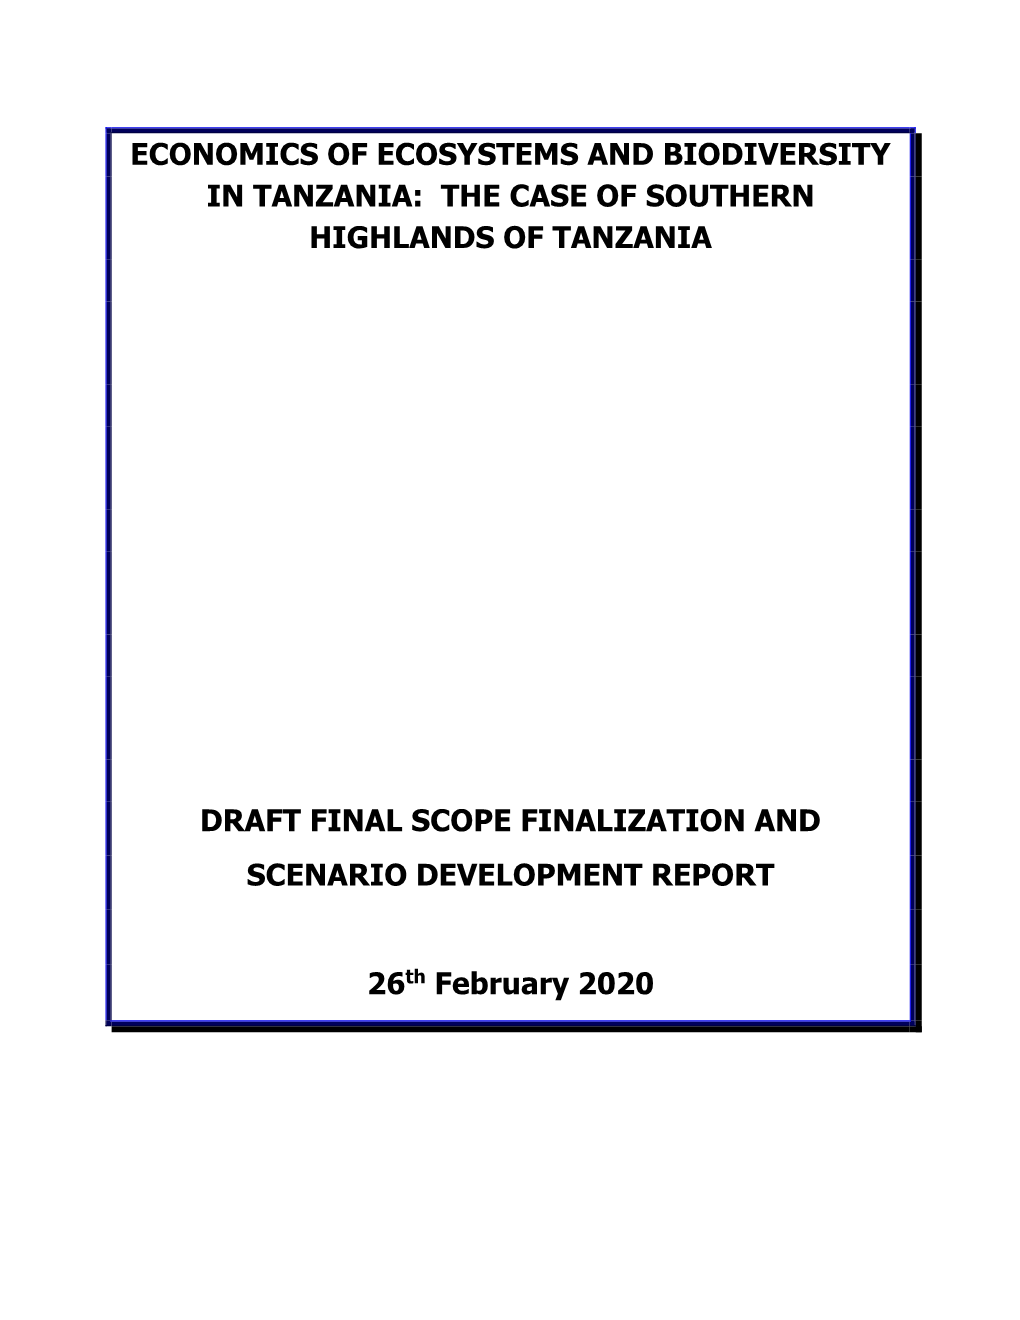 The Case of Southern Highlands of Tanzania